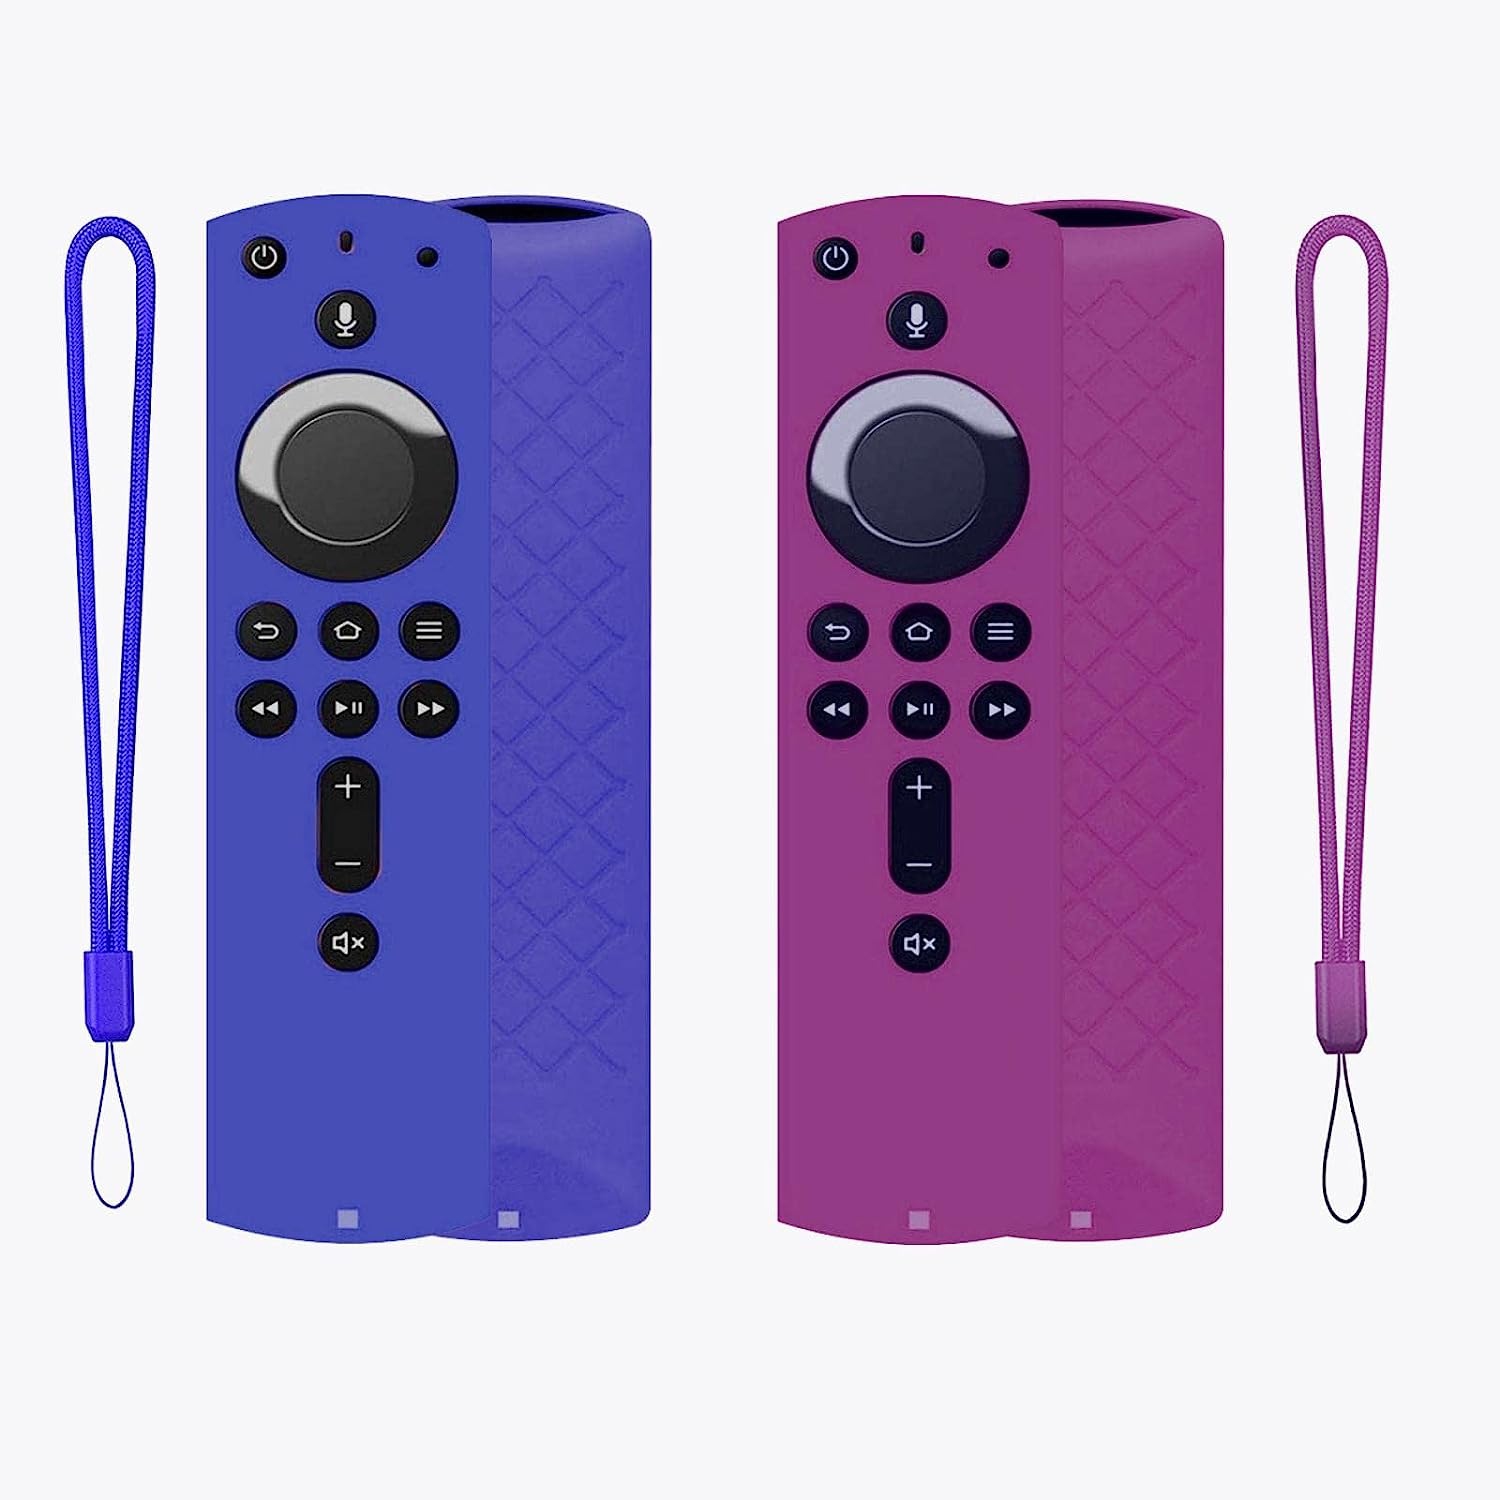 Shockproof Protective Silicone Case/Covers Compatible with All-New Alexa Voice Remote for Fire TV Stick 4K, Fire TV Stick (2nd Gen), Fire TV (3rd Gen) - Blue / Purple